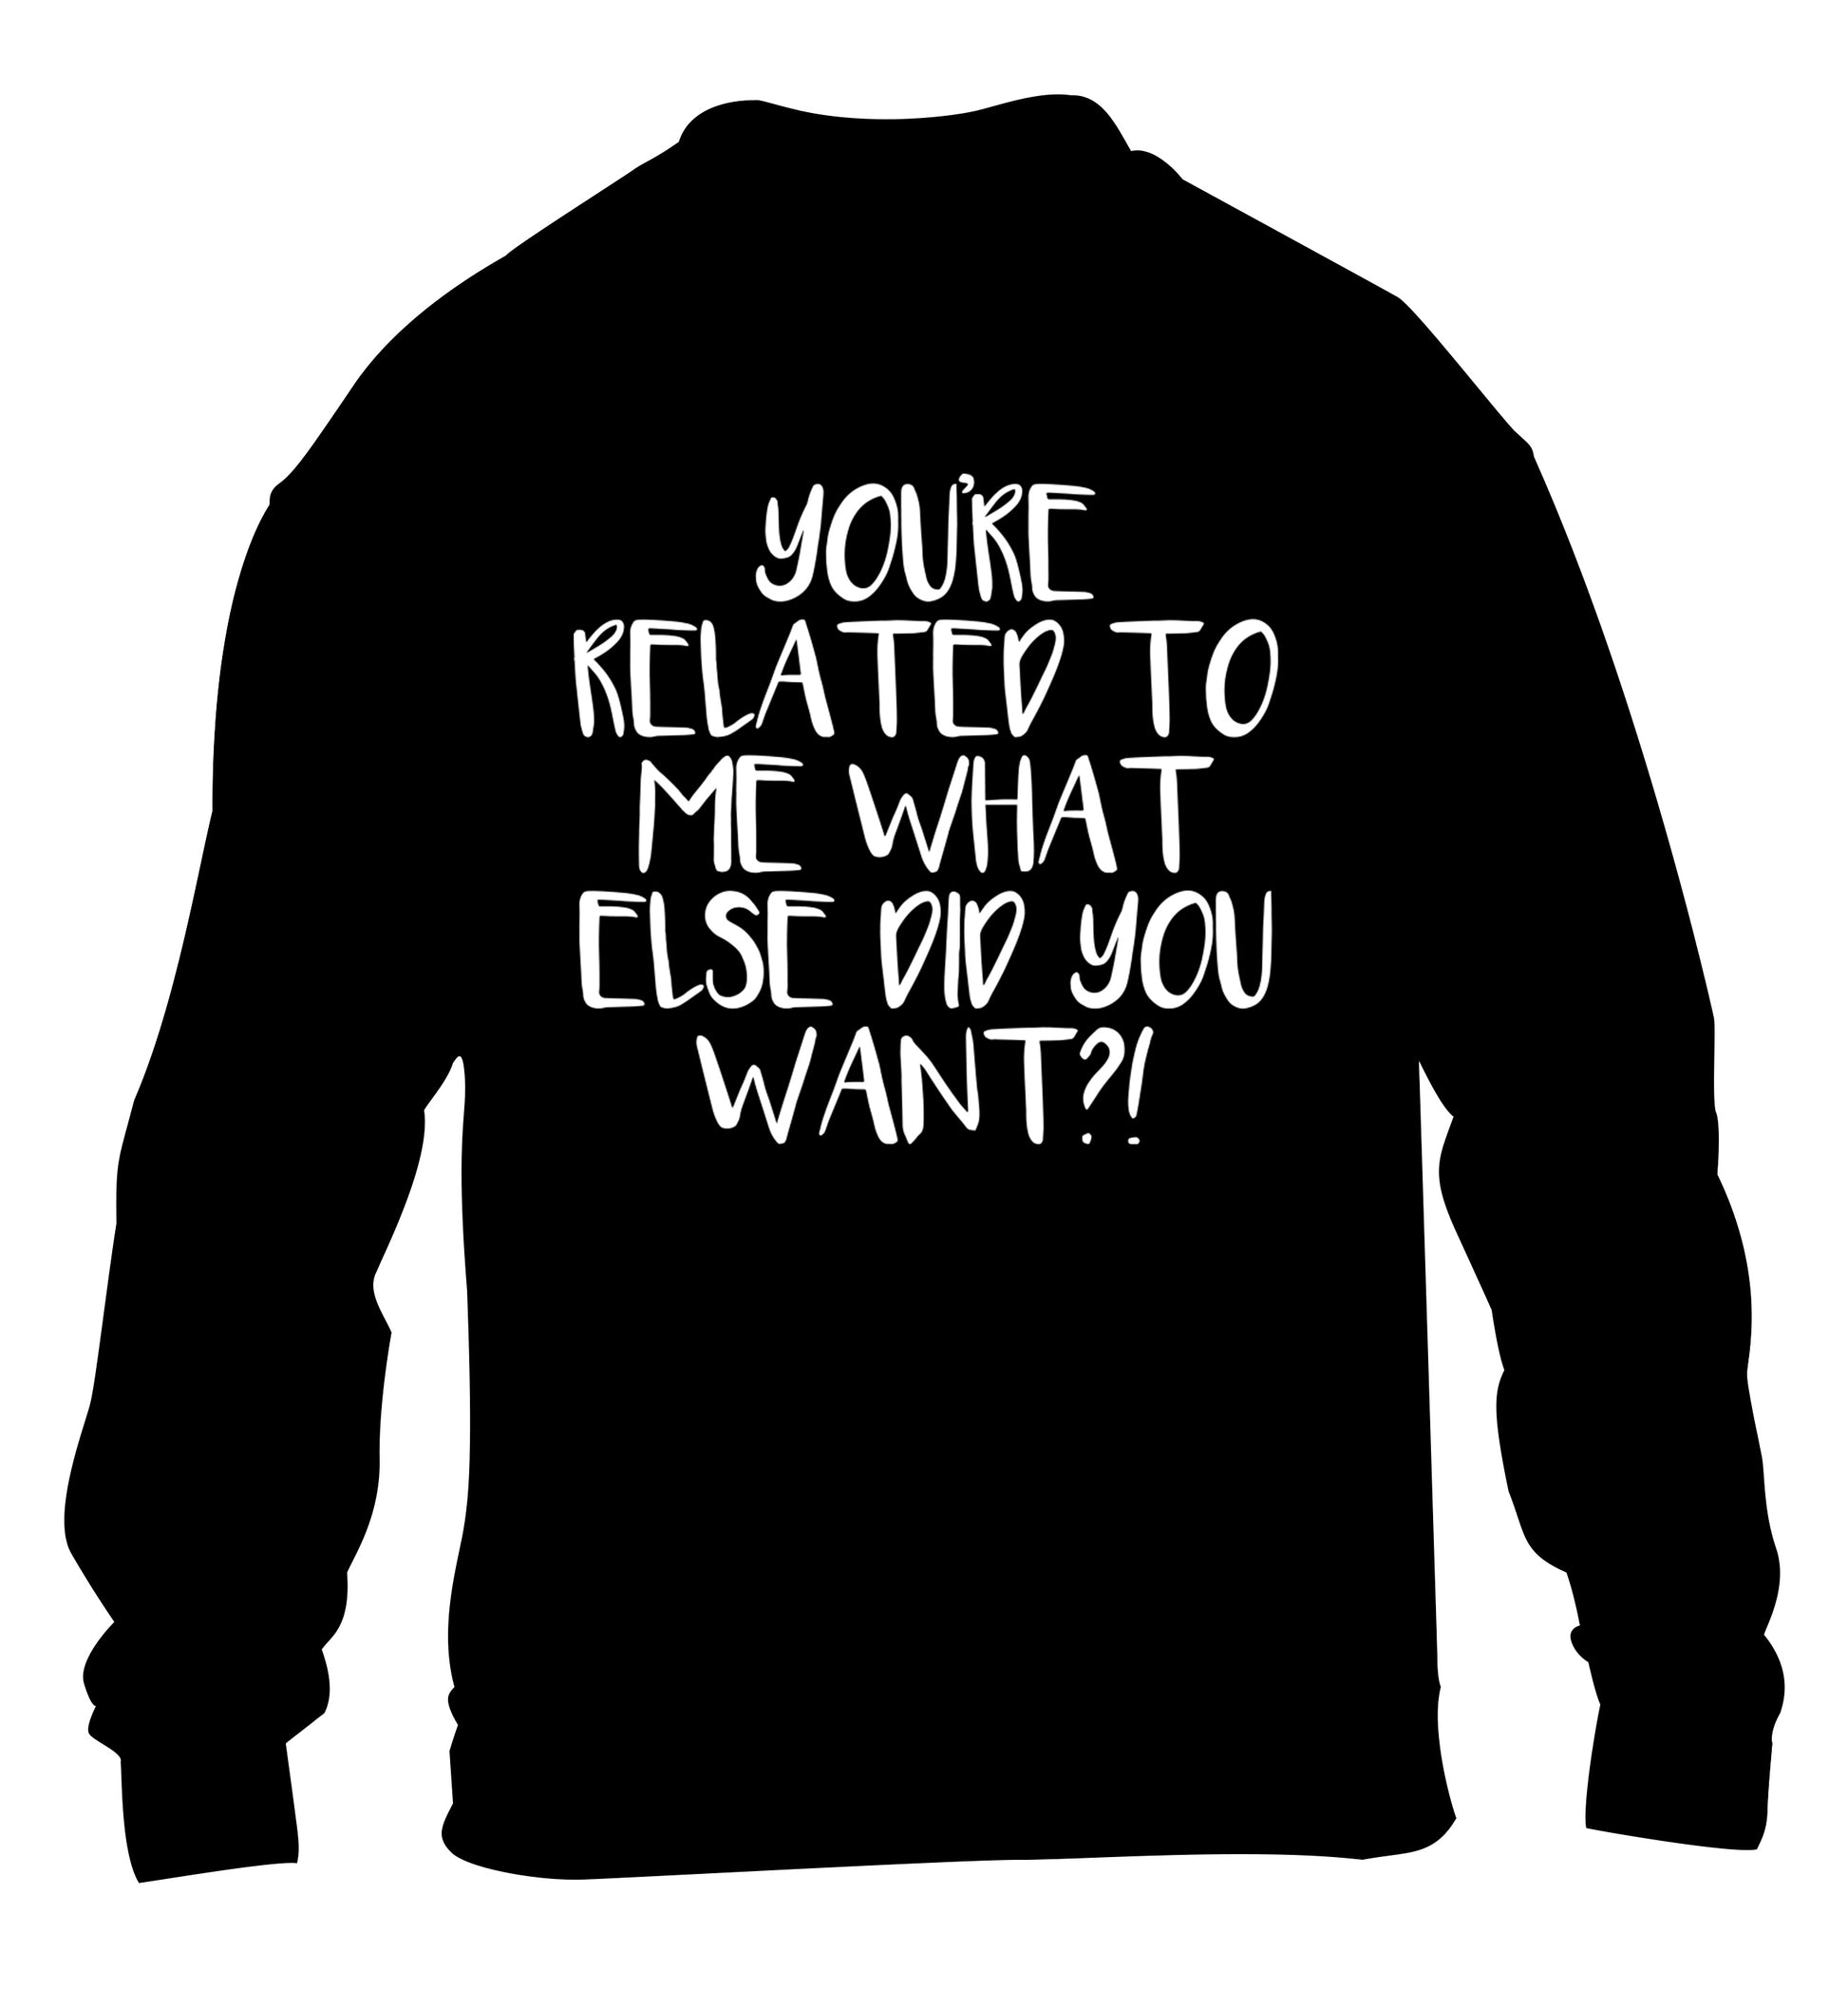 You're related to me what more do you want? children's black sweater 12-13 Years